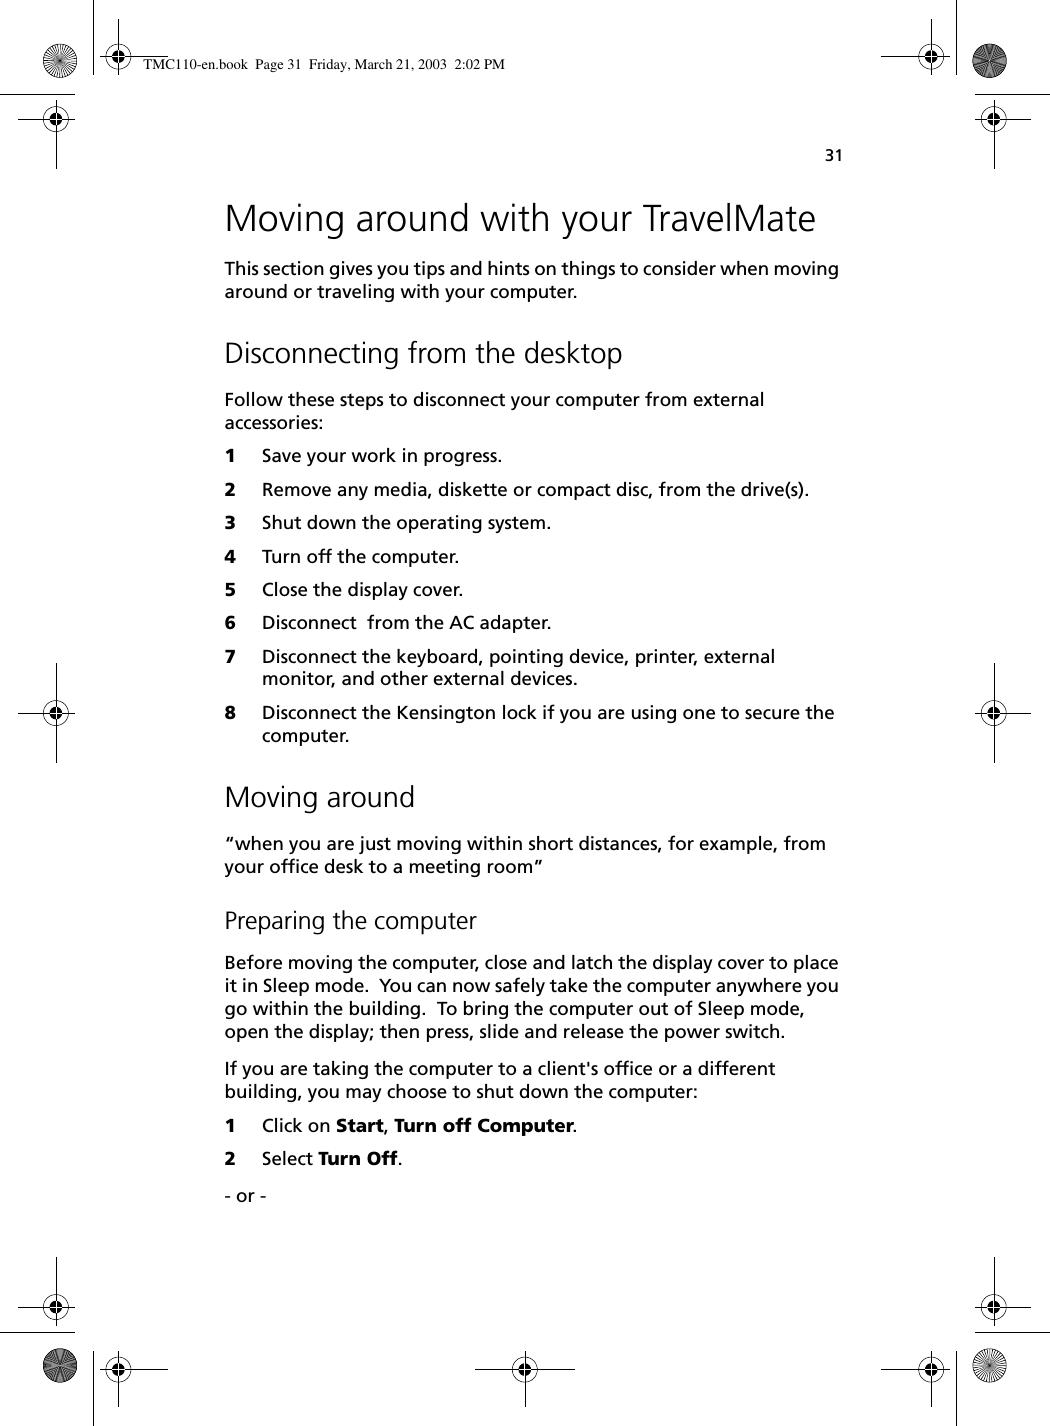 31Moving around with your TravelMateThis section gives you tips and hints on things to consider when moving around or traveling with your computer.Disconnecting from the desktopFollow these steps to disconnect your computer from external accessories:1Save your work in progress.2Remove any media, diskette or compact disc, from the drive(s).3Shut down the operating system.4Turn off the computer.5Close the display cover.6Disconnect  from the AC adapter.7Disconnect the keyboard, pointing device, printer, external monitor, and other external devices.8Disconnect the Kensington lock if you are using one to secure the computer.Moving around“when you are just moving within short distances, for example, from your office desk to a meeting room”Preparing the computerBefore moving the computer, close and latch the display cover to place it in Sleep mode.  You can now safely take the computer anywhere you go within the building.  To bring the computer out of Sleep mode, open the display; then press, slide and release the power switch.If you are taking the computer to a client&apos;s office or a different building, you may choose to shut down the computer: 1Click on Start, Turn off Computer.  2Select Turn Off. - or - TMC110-en.book  Page 31  Friday, March 21, 2003  2:02 PM